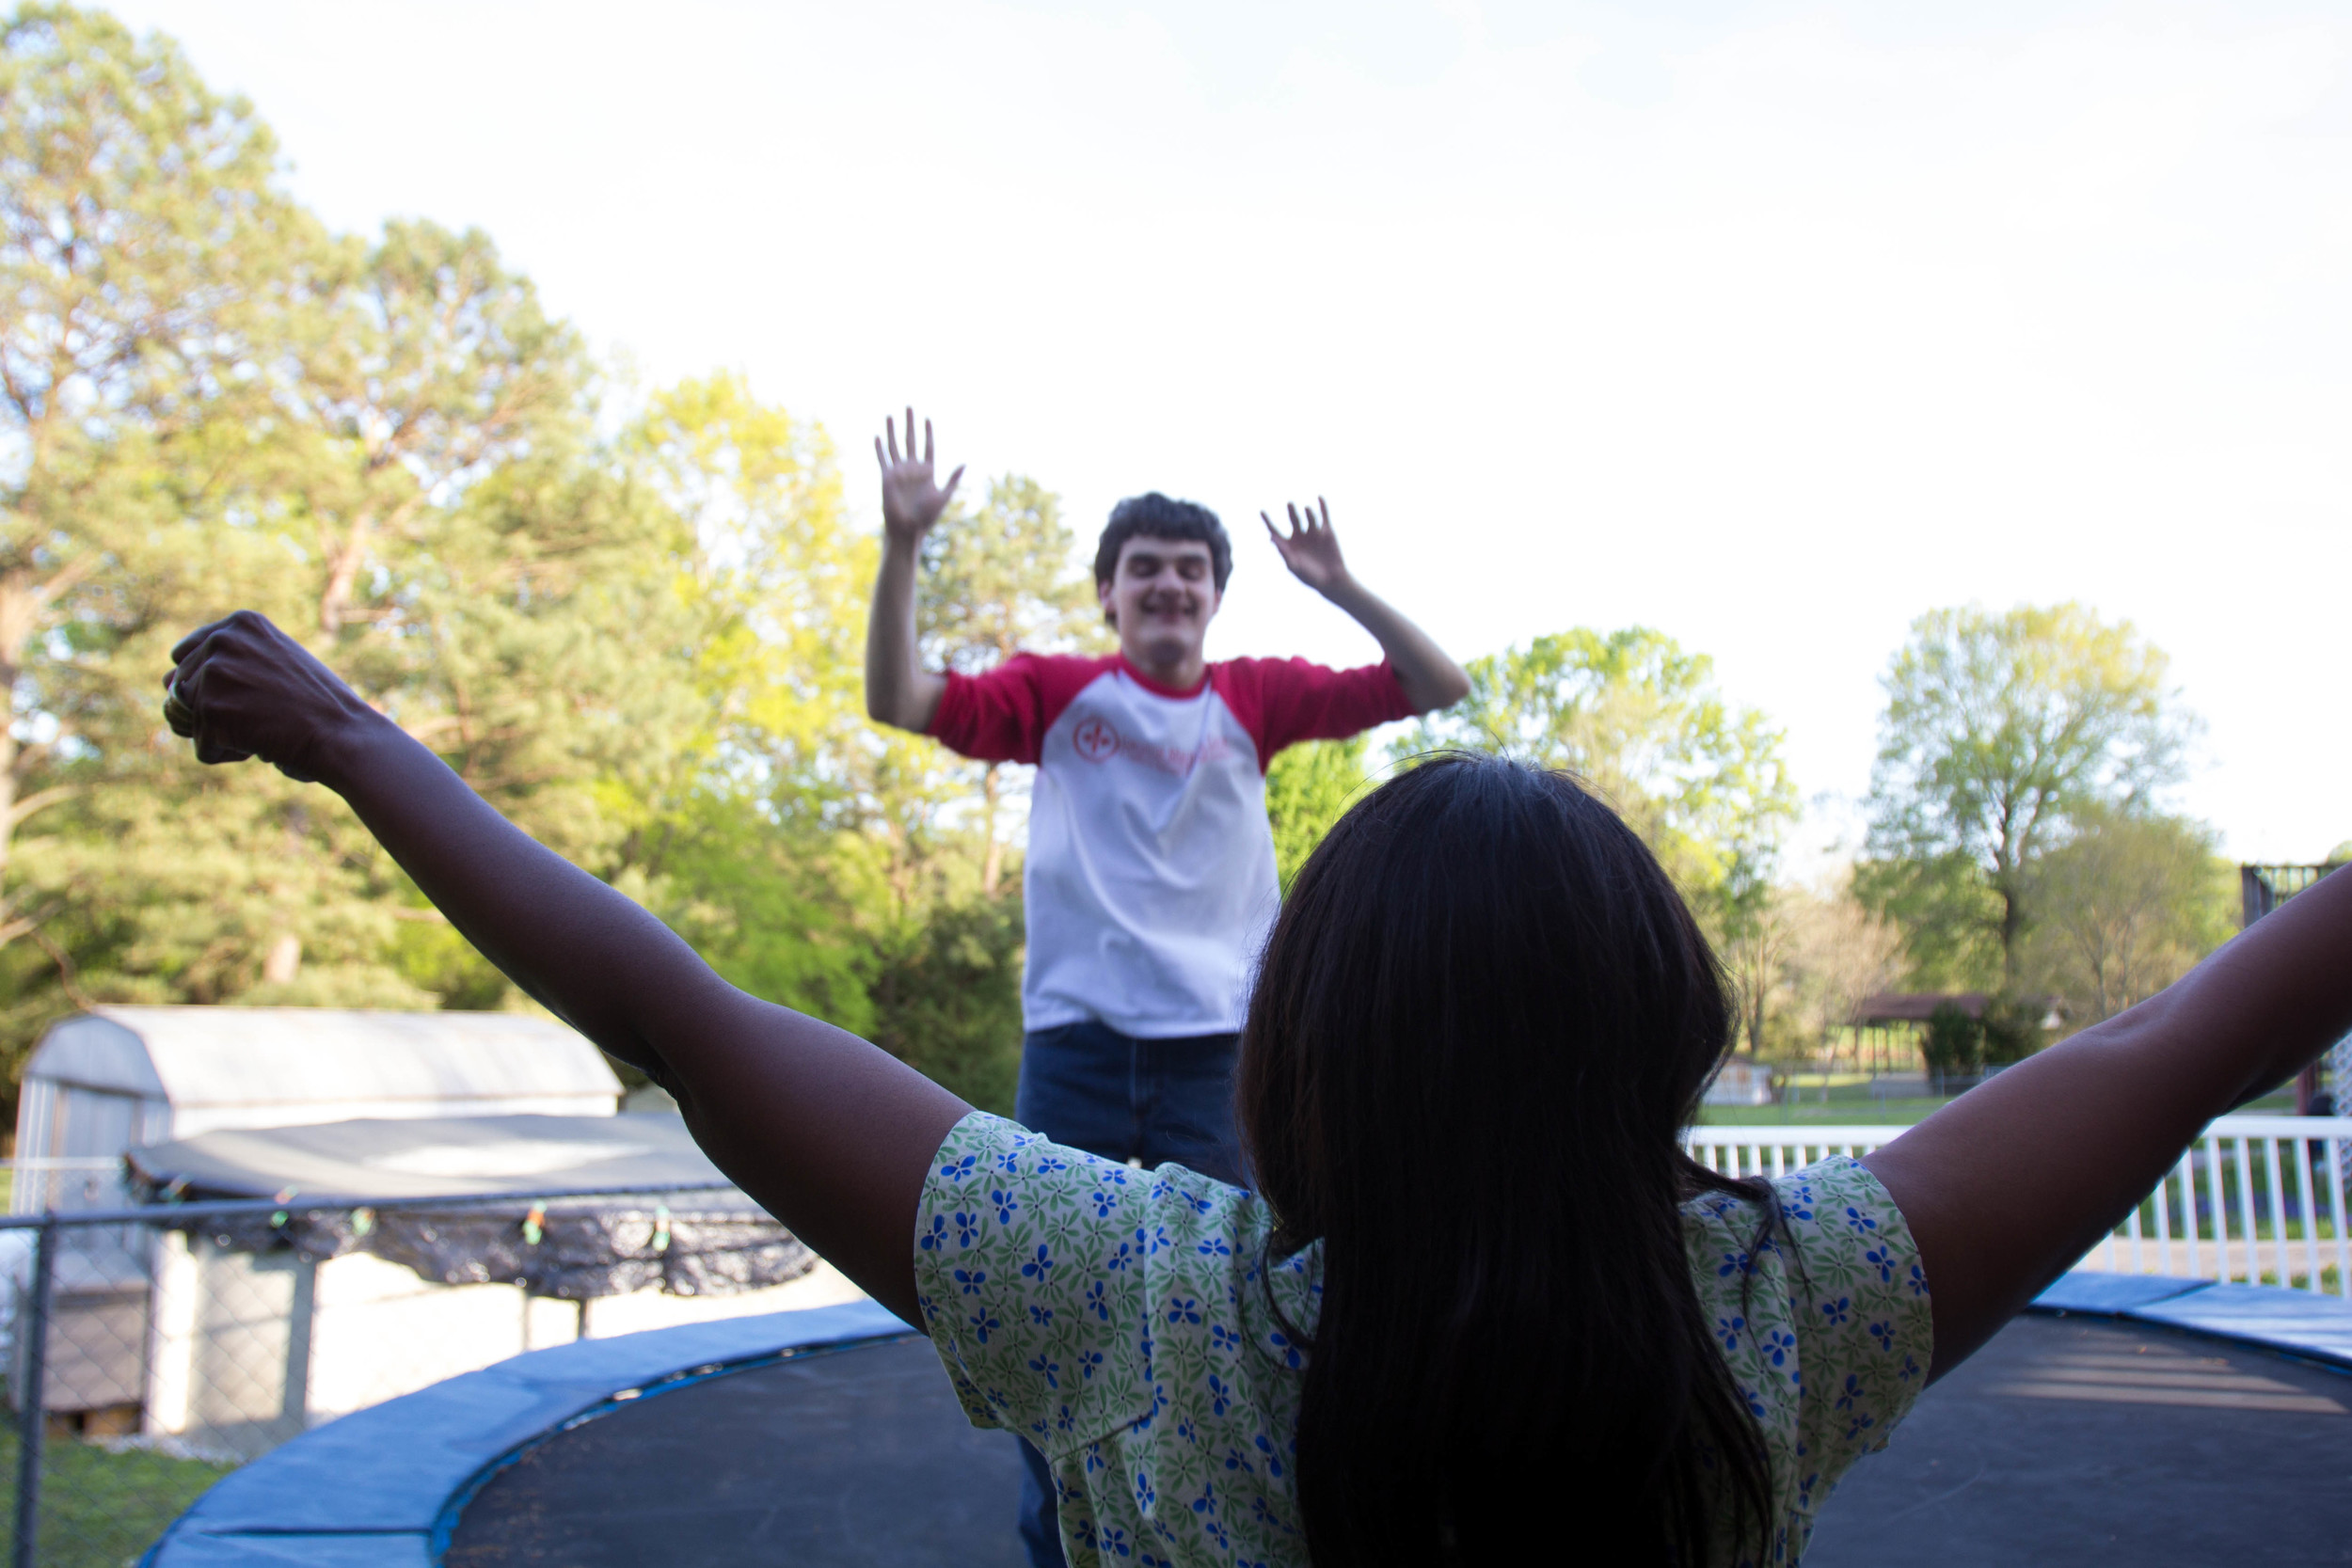  Zack has always been an active child. When he was younger, he would jump for hours and hours on a small trampoline in his bedroom. As he grew taller and outgrew the indoor trampoline, Vicki and Kevin bought a larger outdoor trampoline.  Here, one of